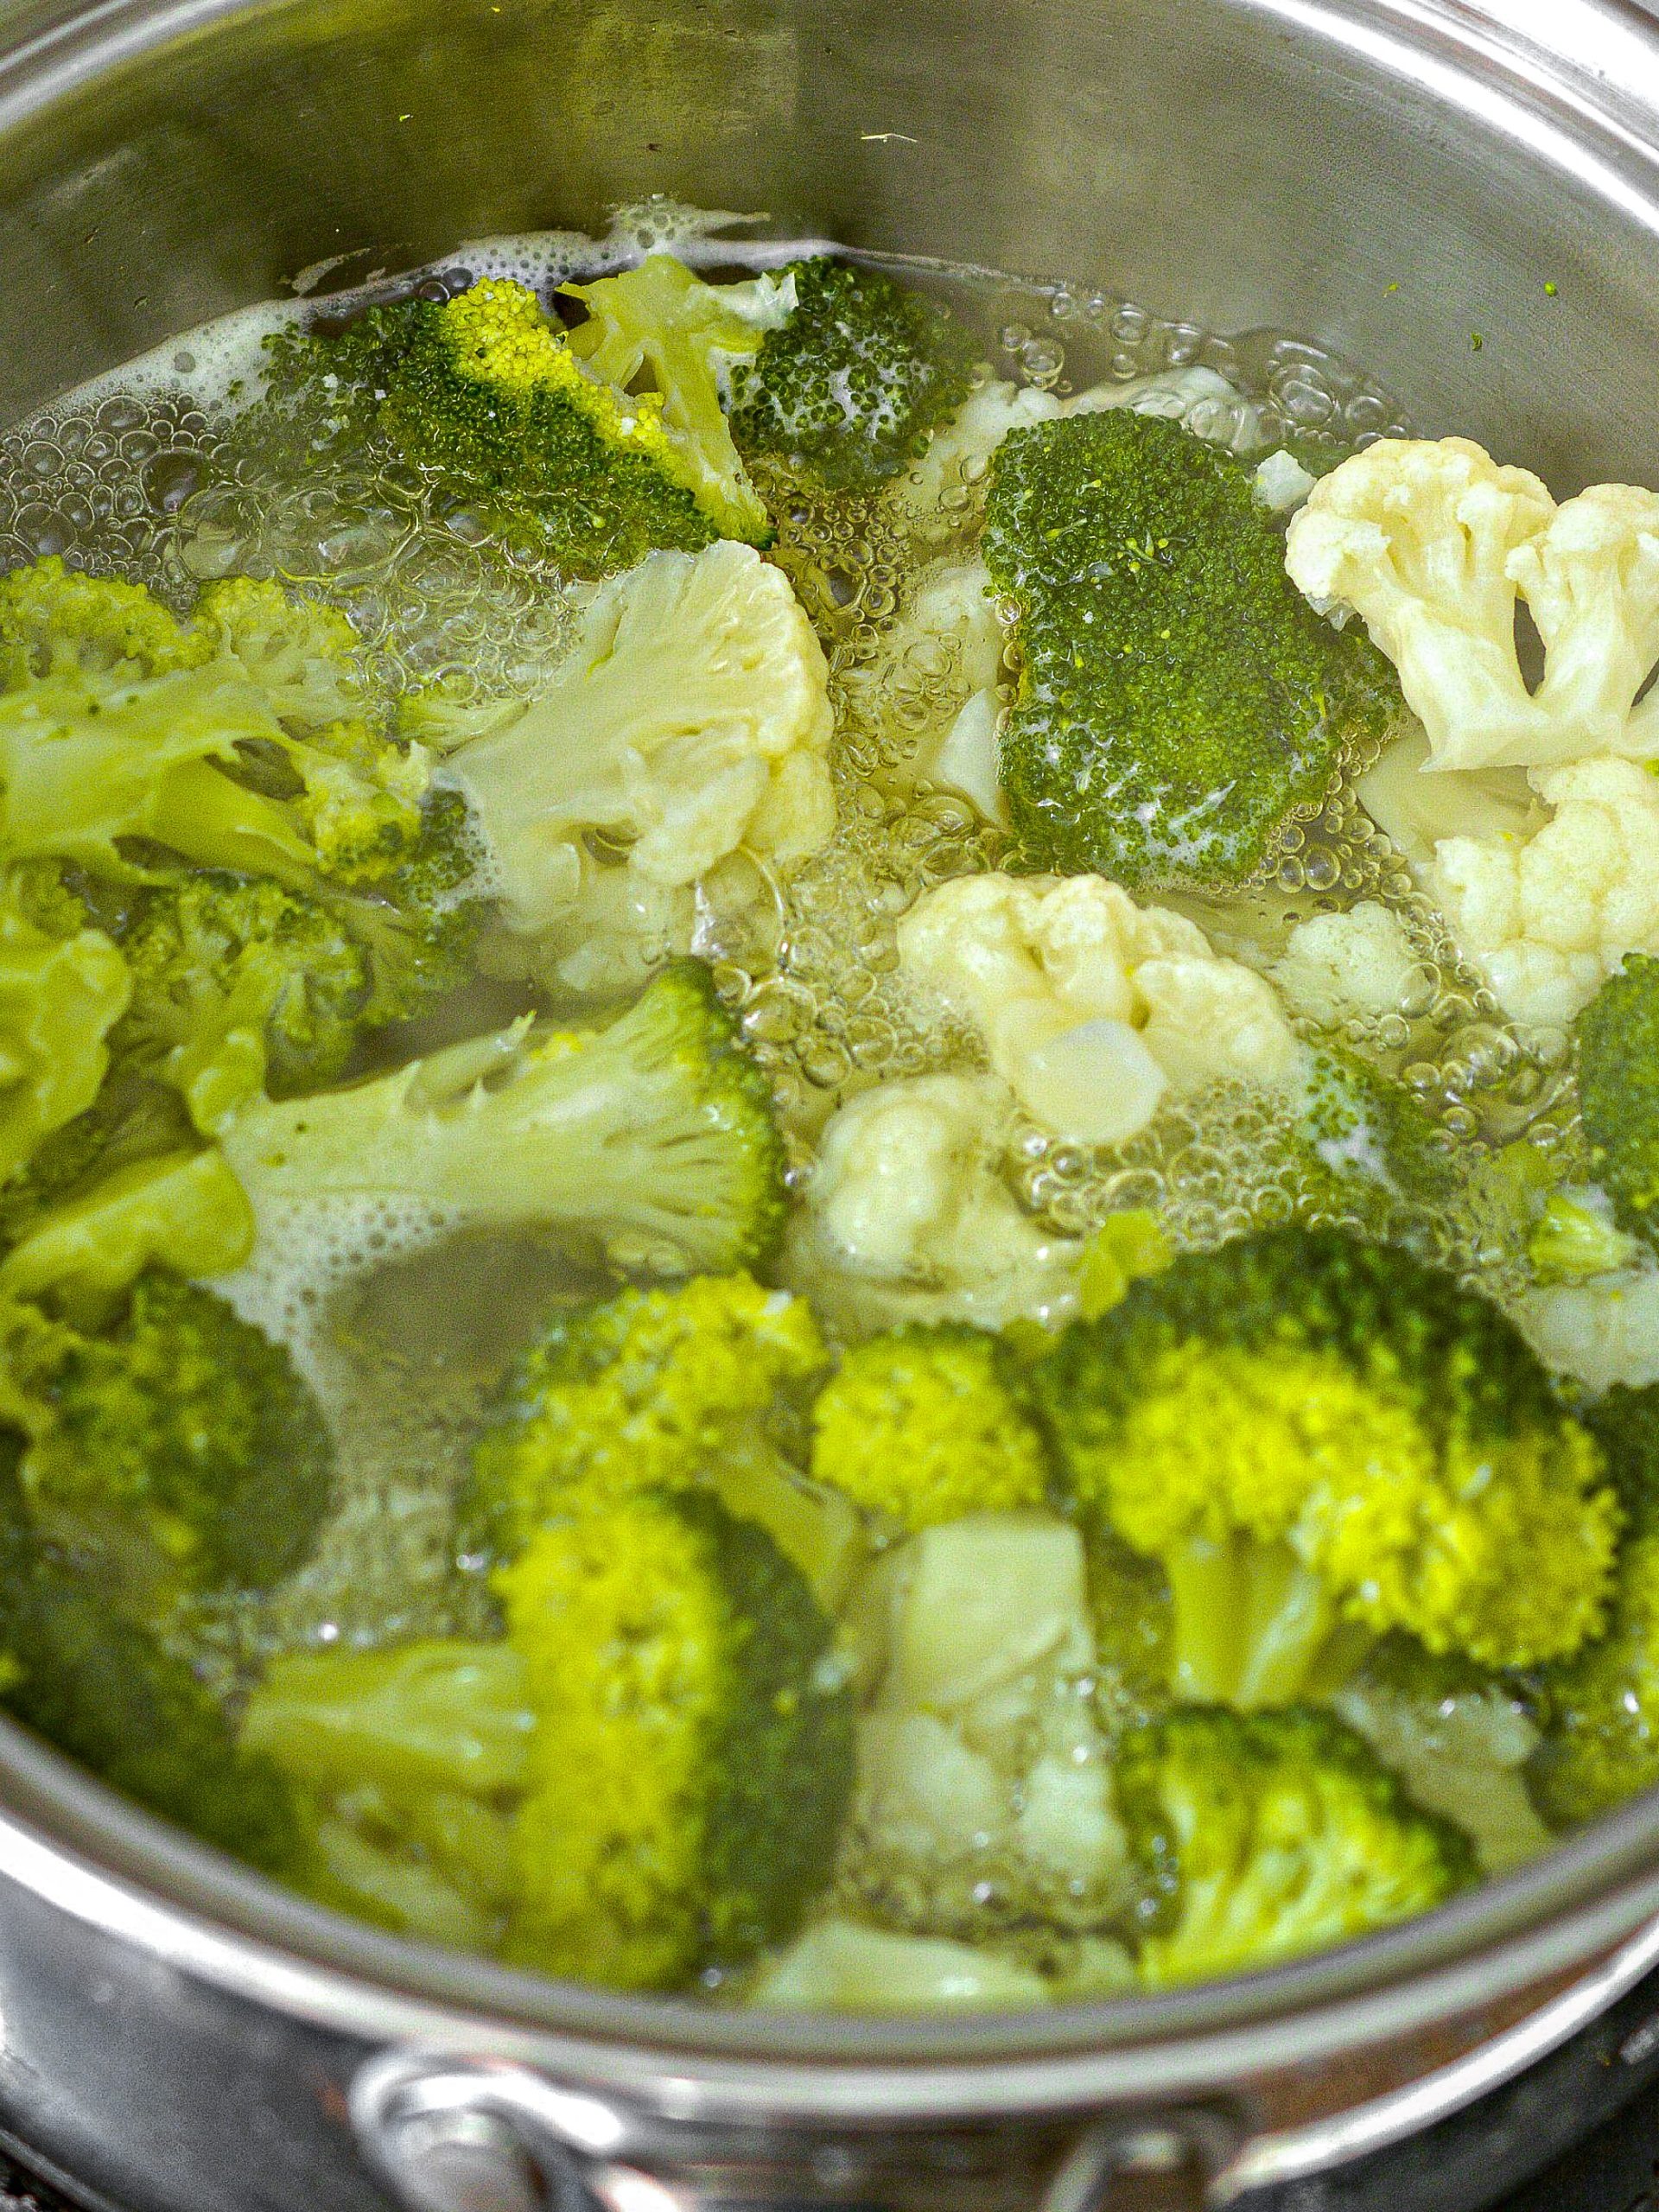 Place the cauliflower and broccoli florets into a pot with water, and bring to a boil on the stove.